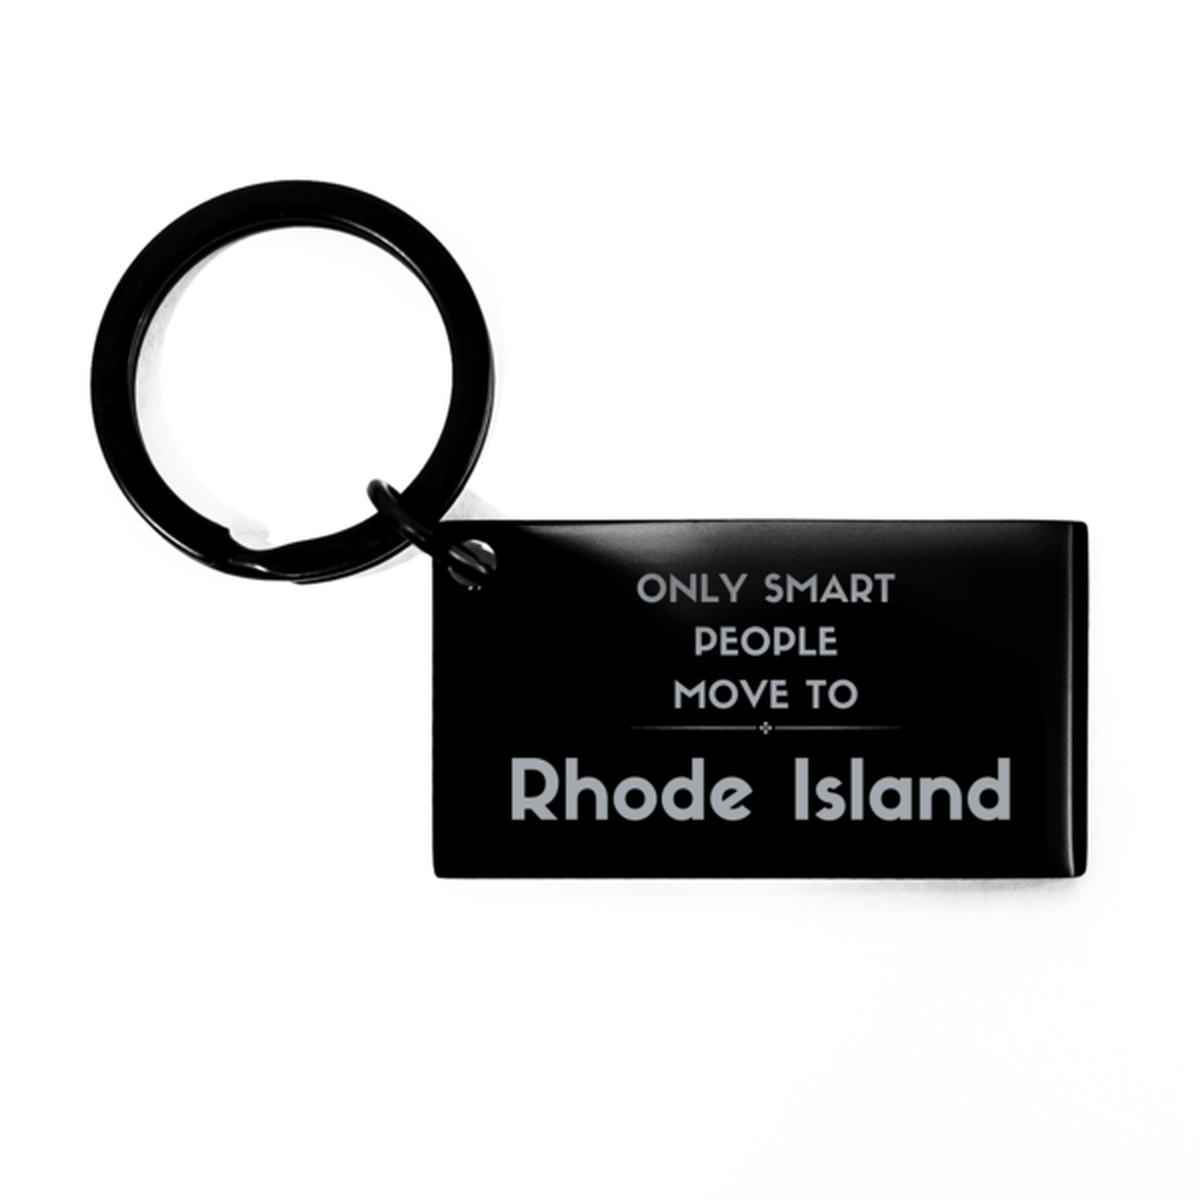 Only smart people move to Rhode Island Keychain, Gag Gifts For Rhode Island, Move to Rhode Island Gifts for Friends Coworker Funny Saying Quote